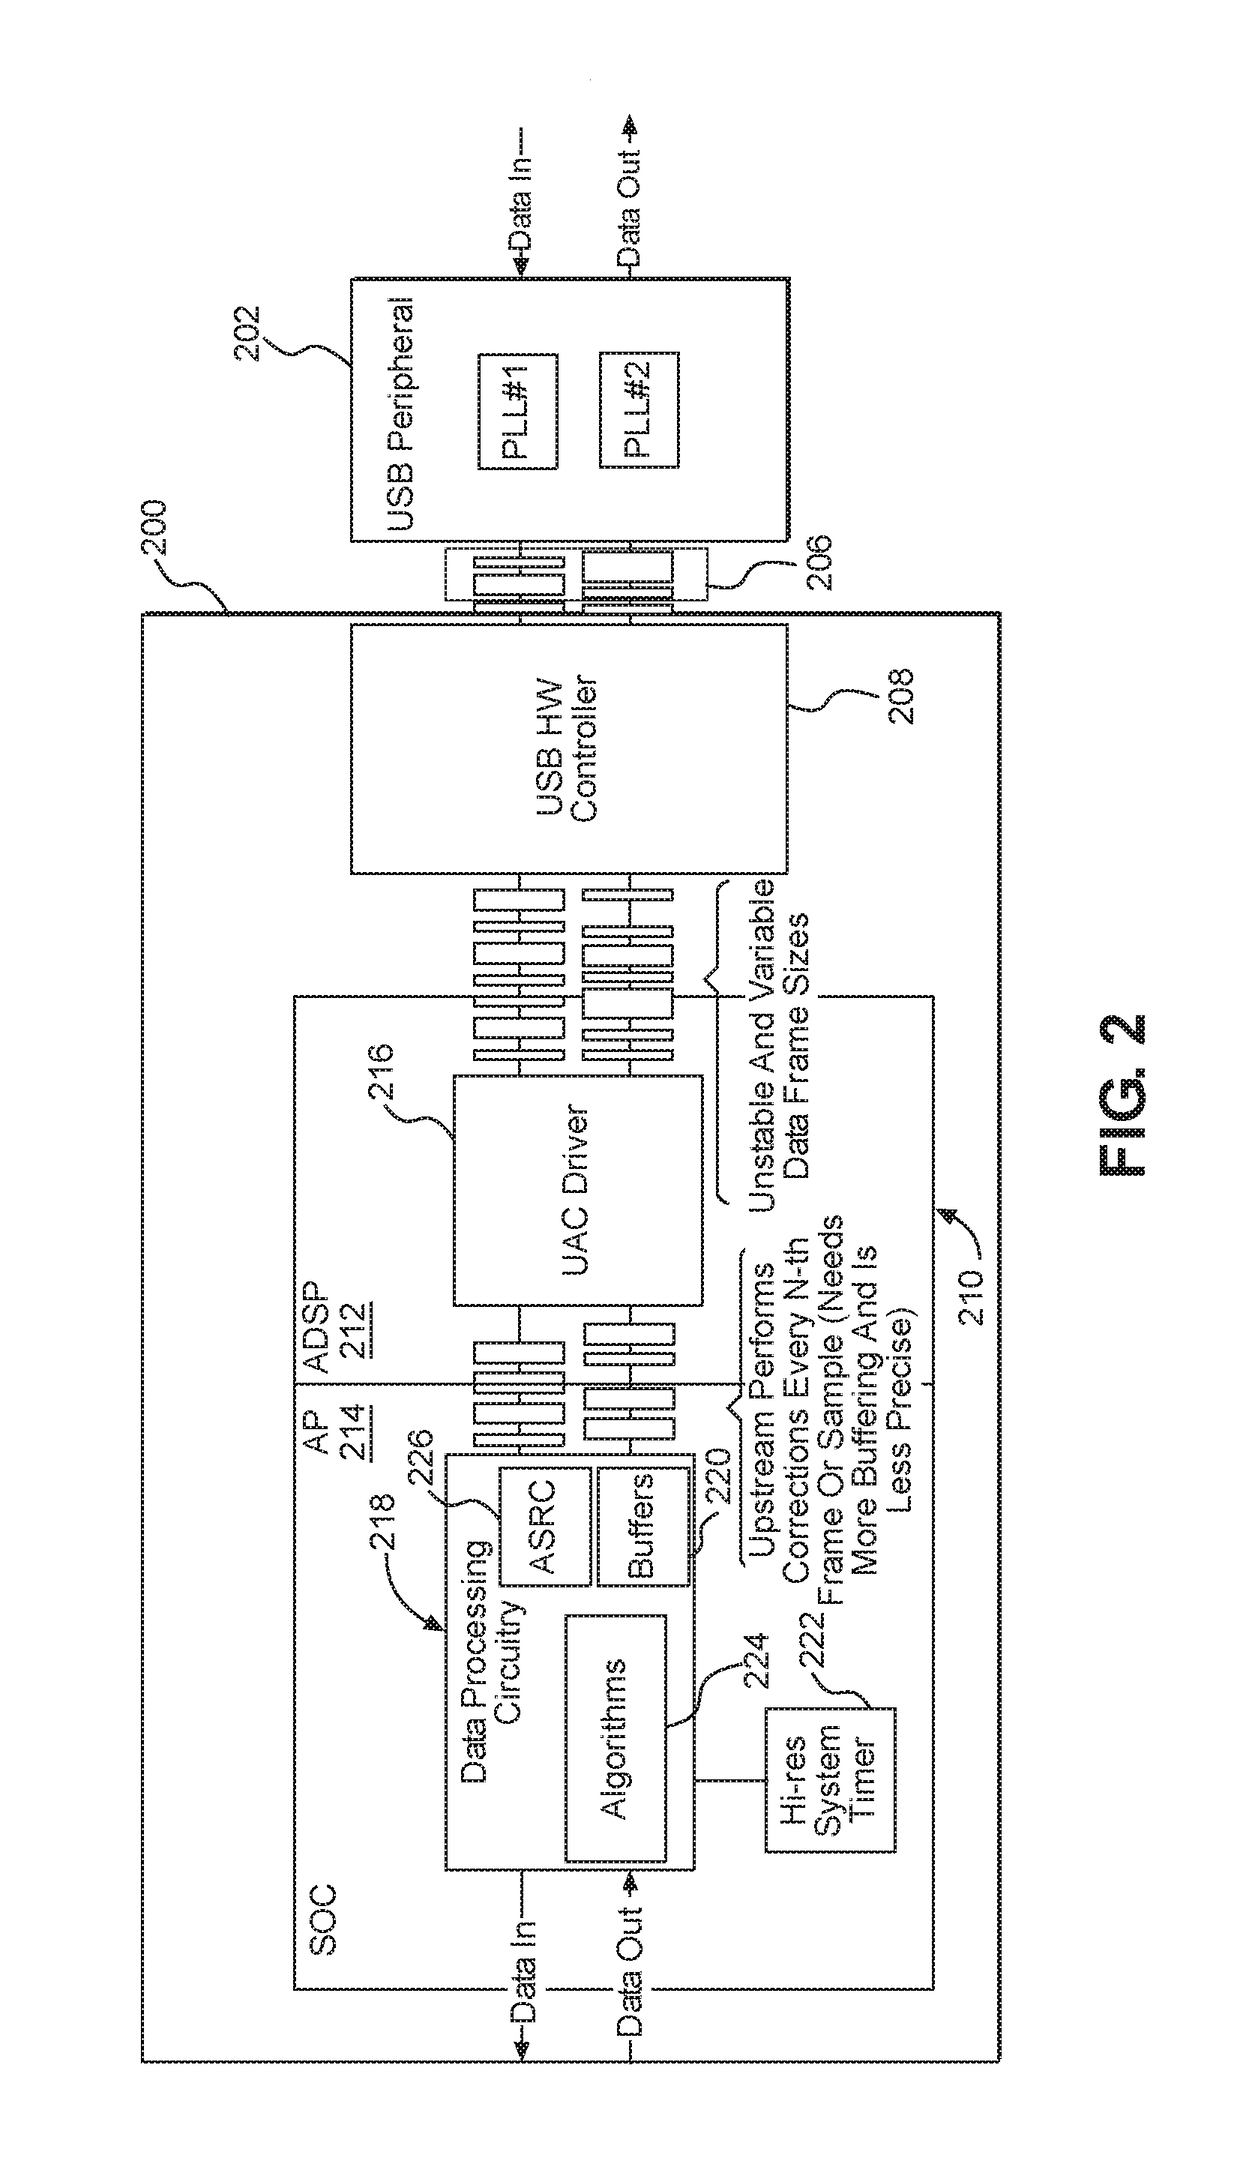 Systems and methods for controlling isochronous data streams